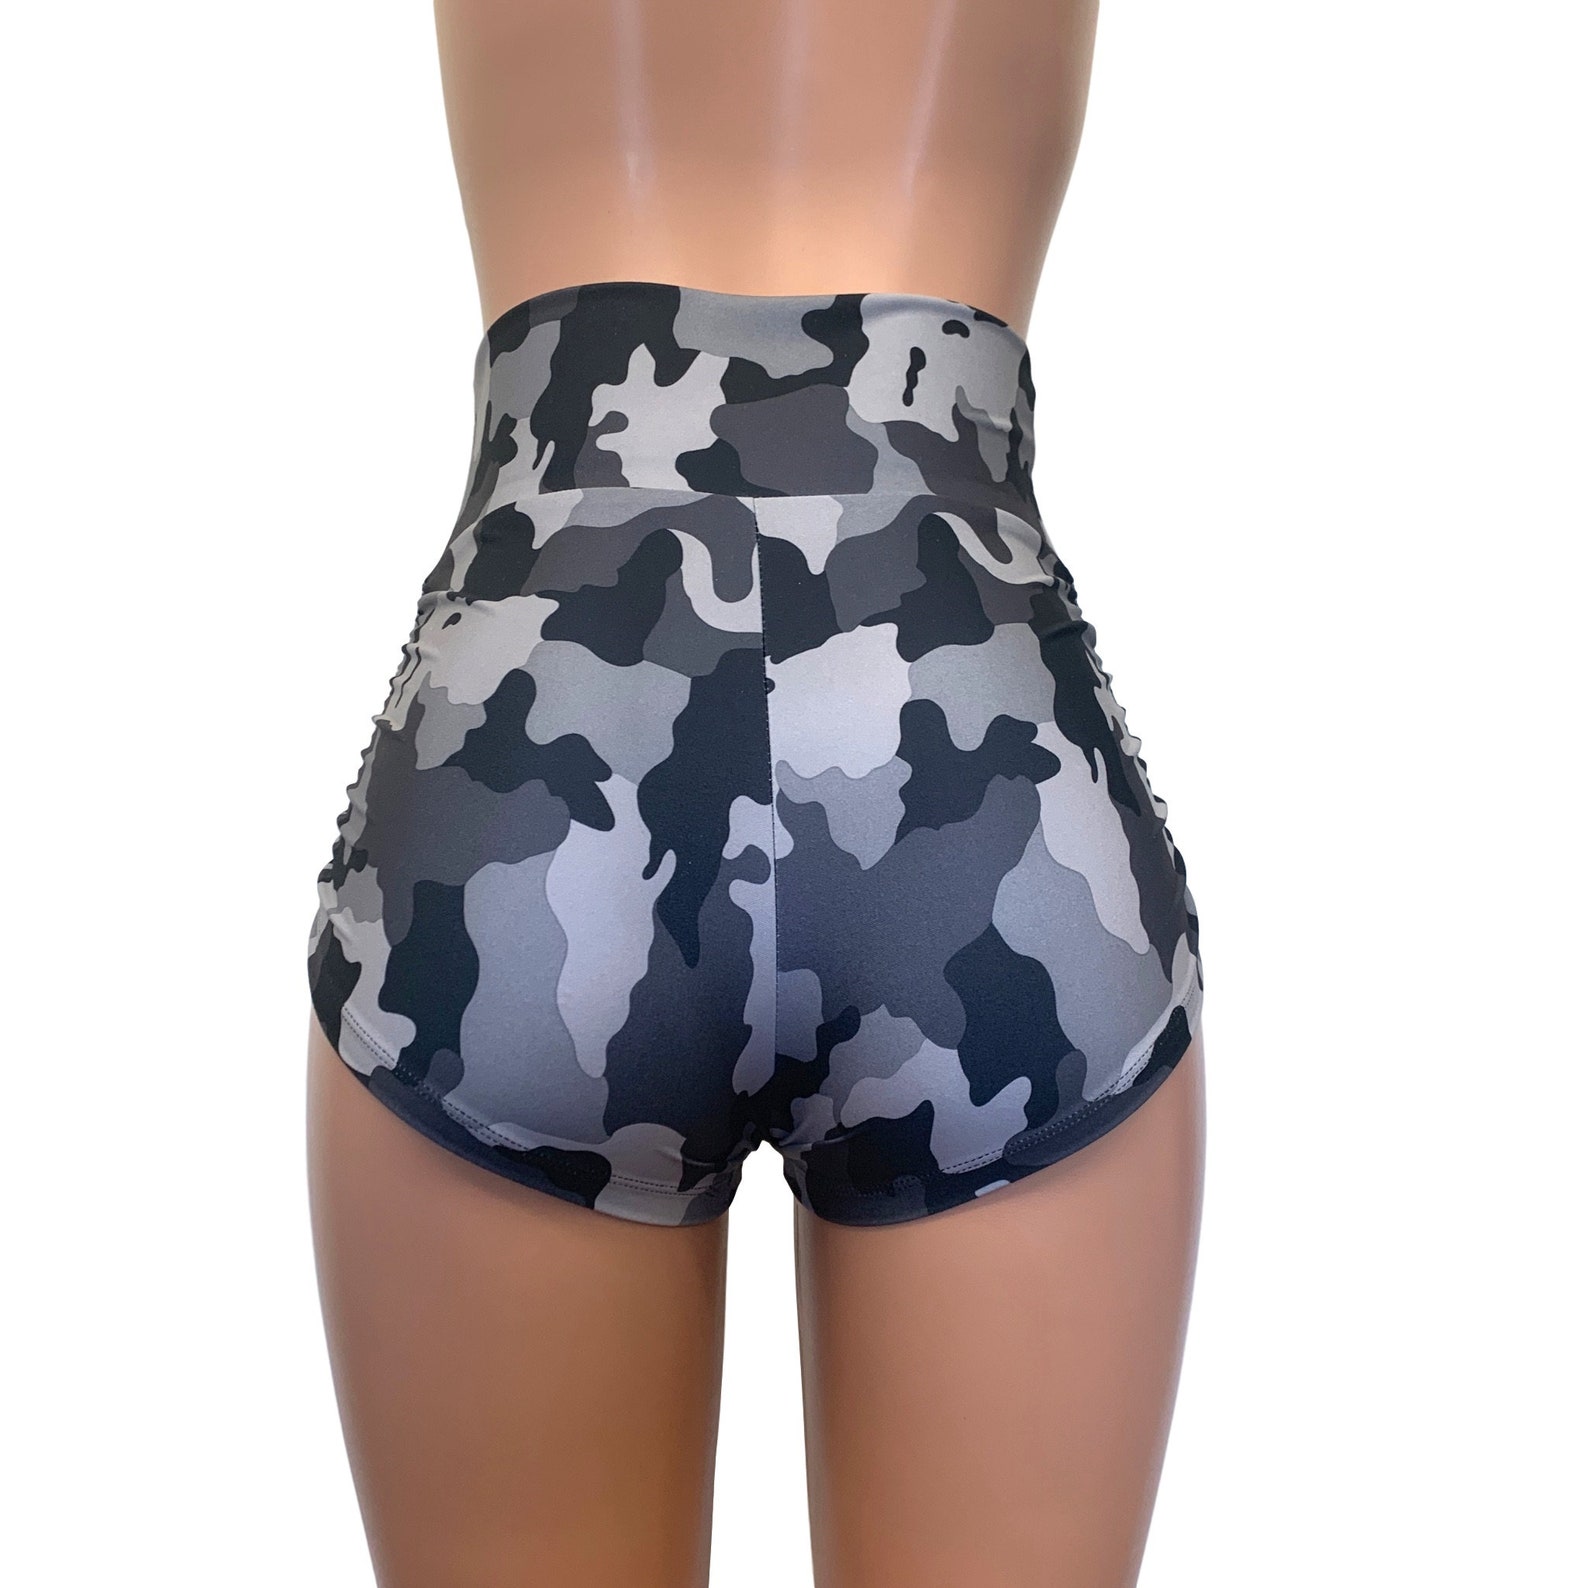 Ruched Booty Shorts Black & Gray Camo CHOOSE your RISE | Etsy